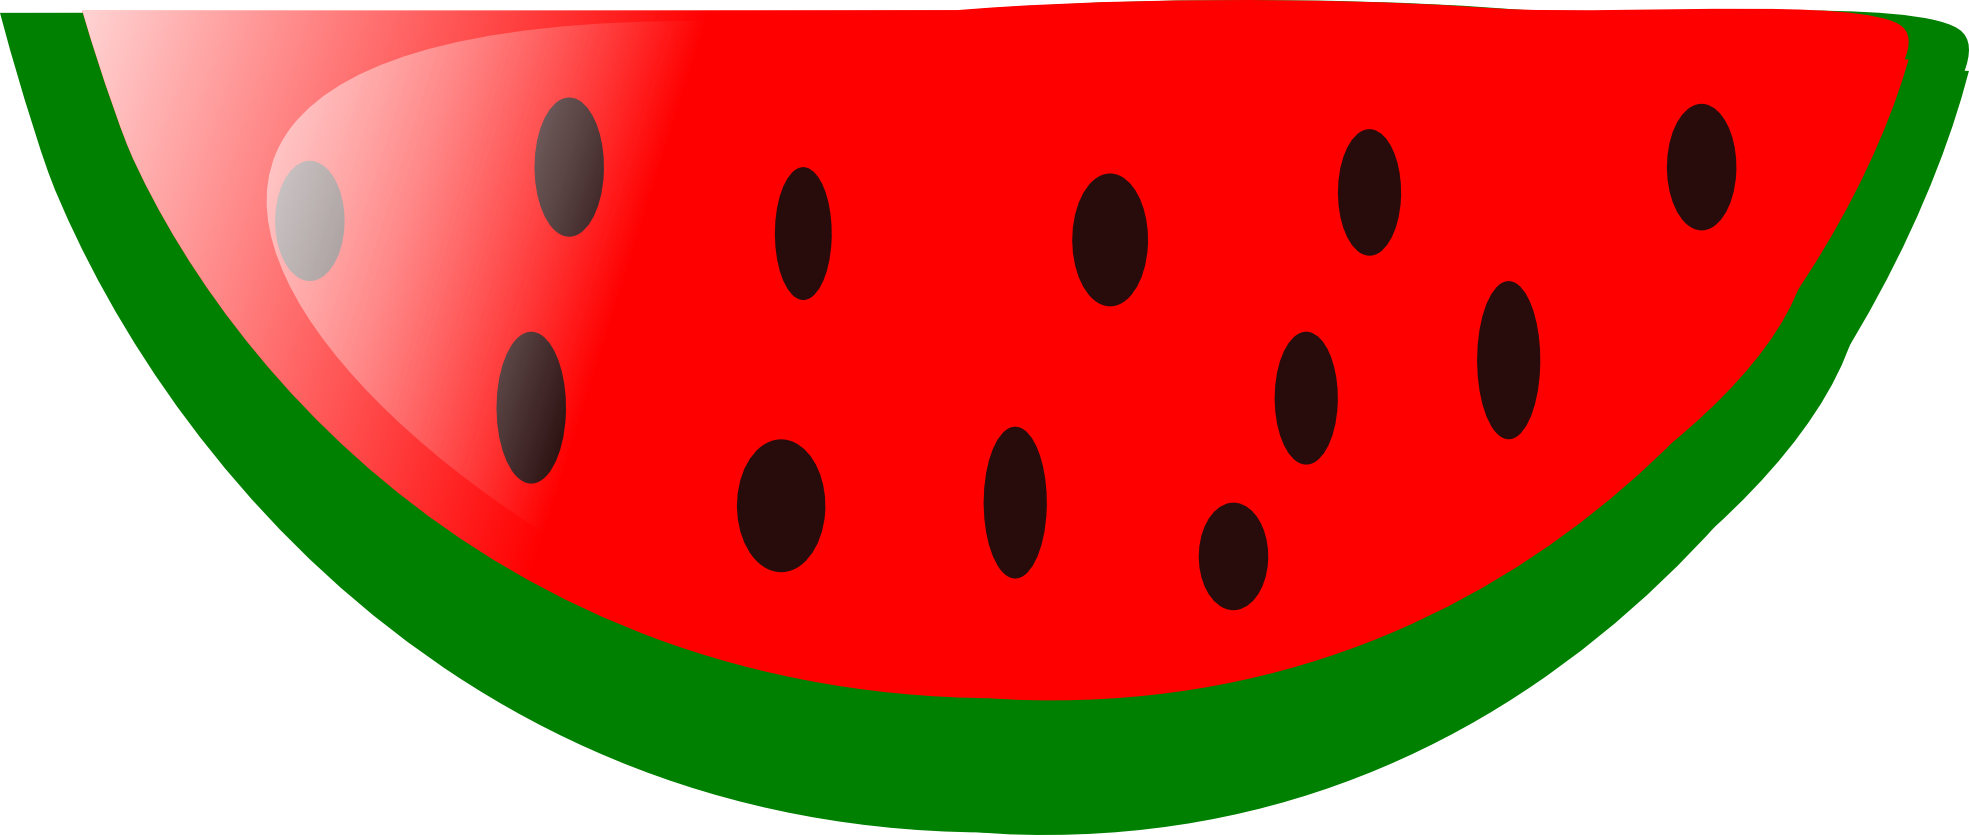 Seedless Watermelon Slice Clipart | Clipart library - Free Clipart 